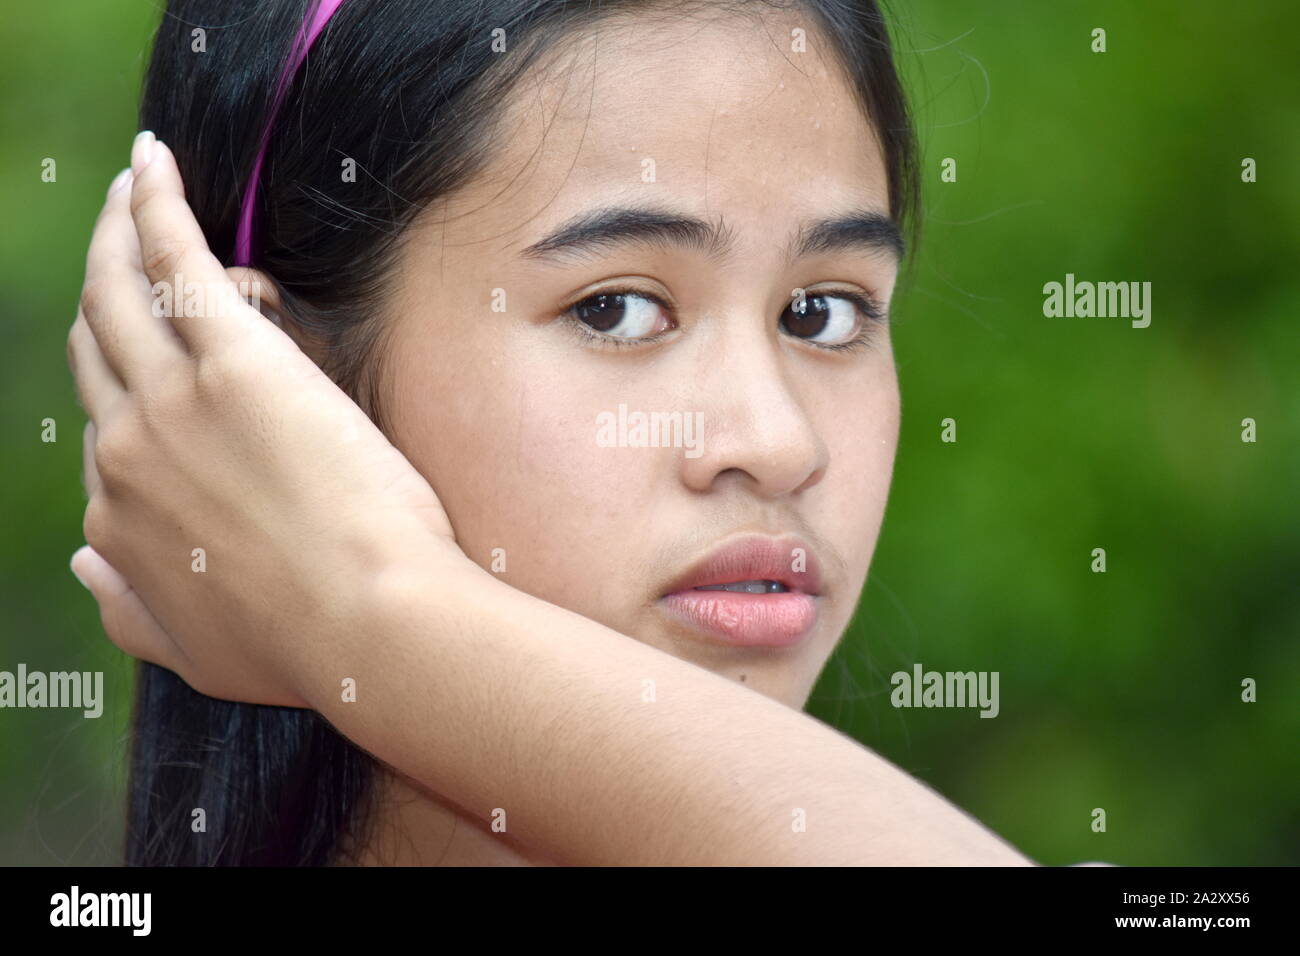 An A Minority Girl And Worry Stock Photo